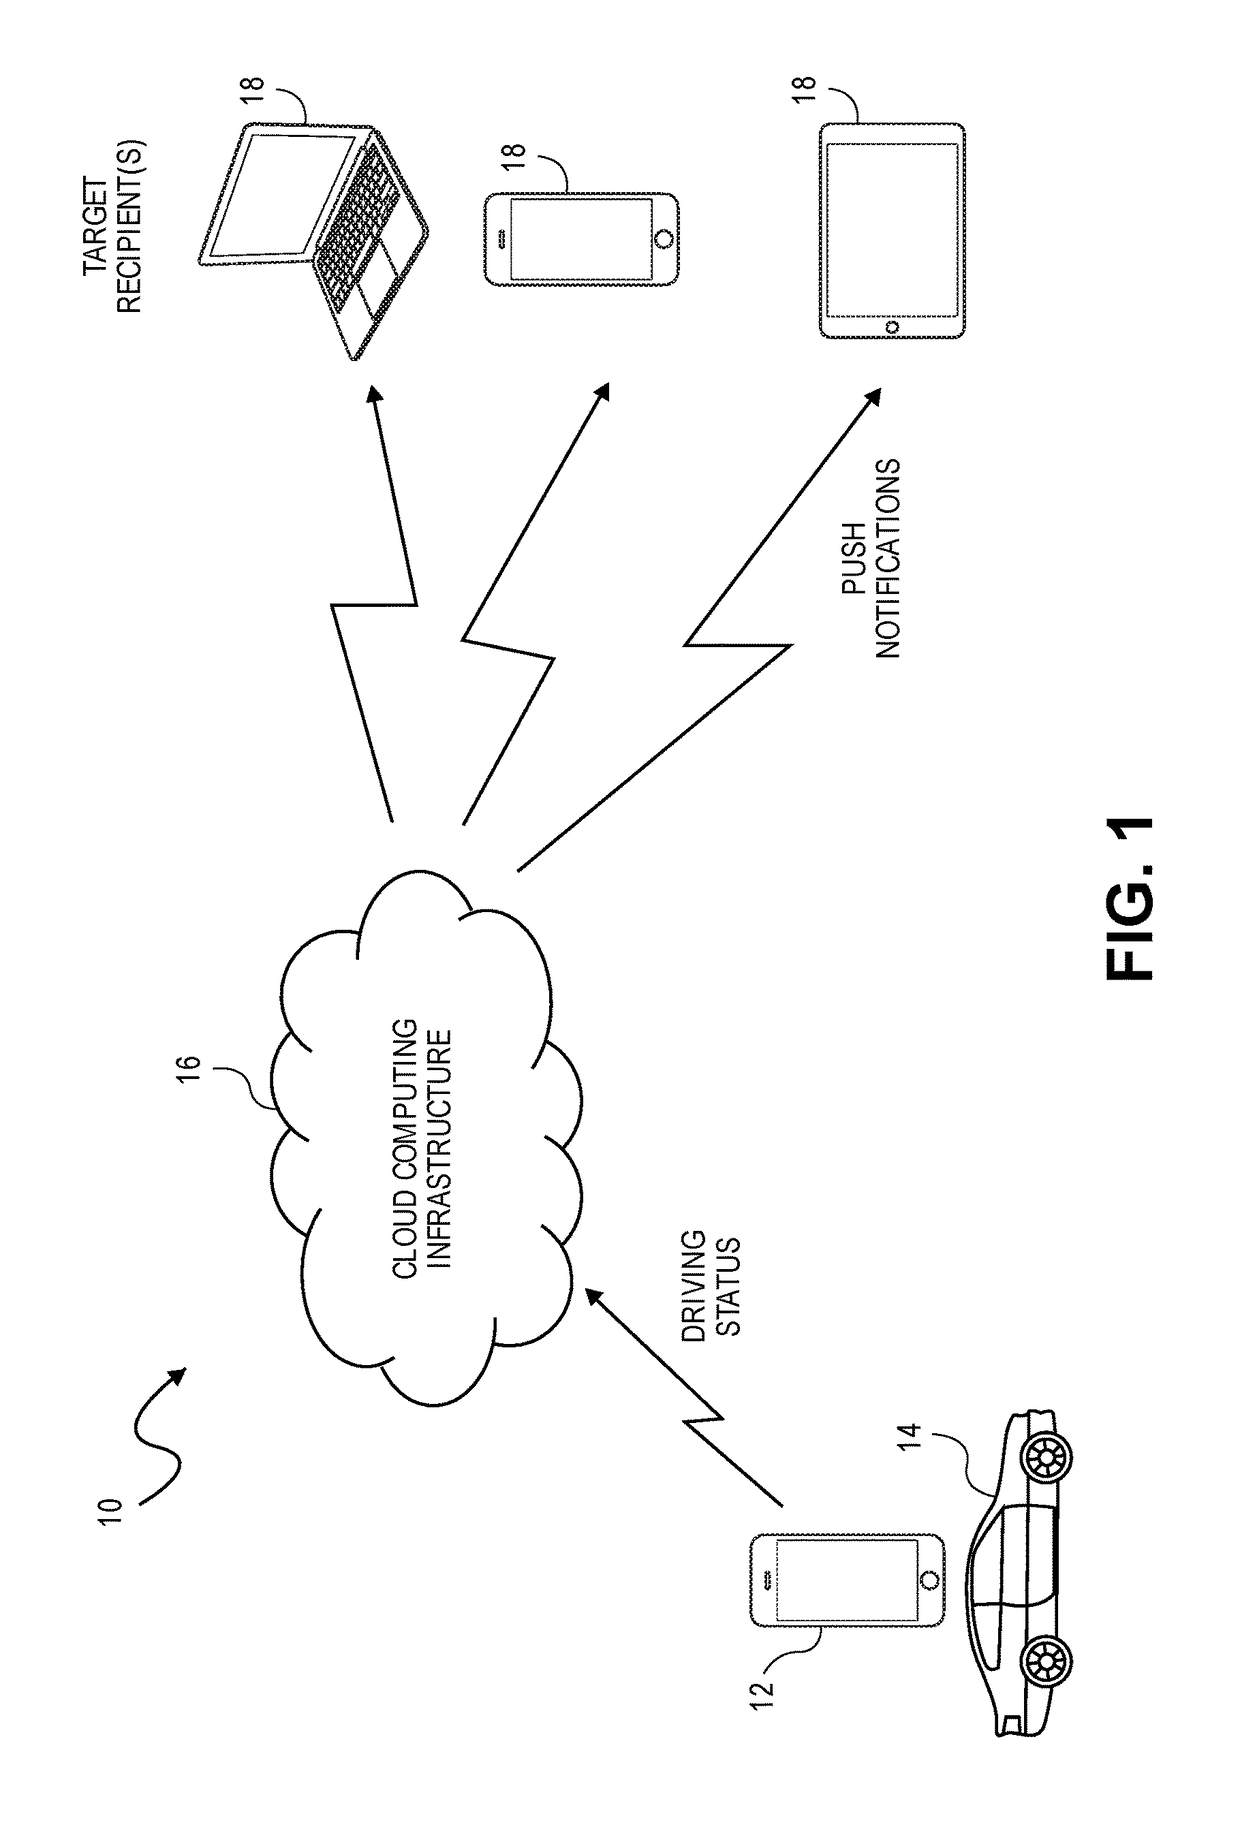 System and method for generating driver status and destination arrival notifications for reducing distracted driving and increasing driver safety